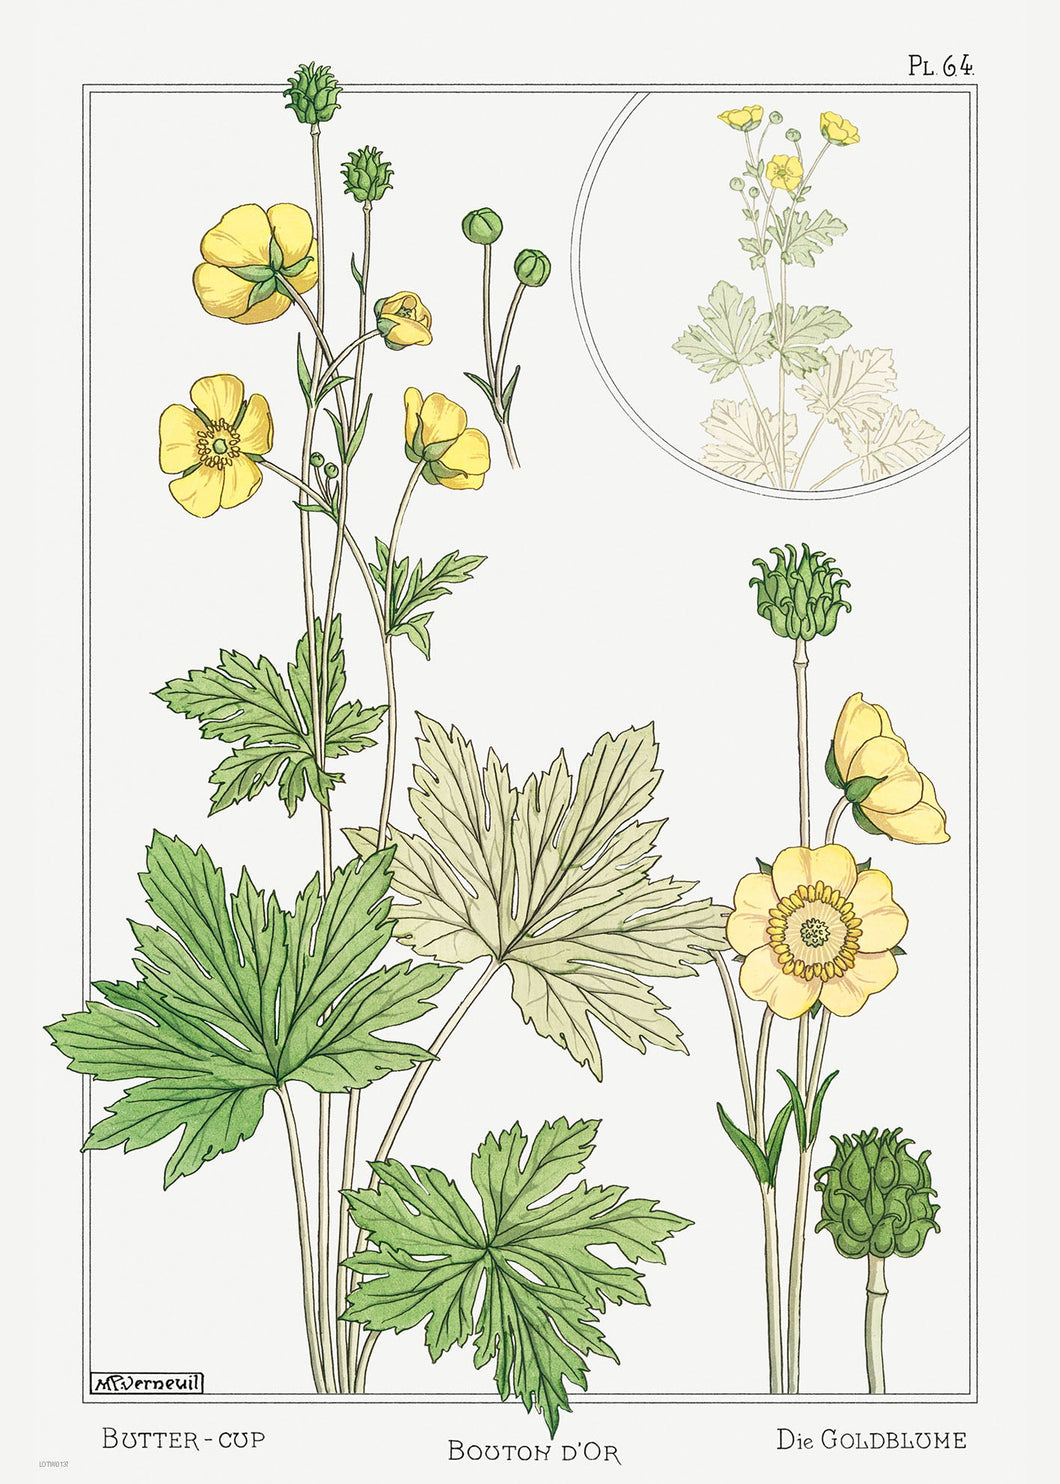 Botanical 50x70cm Art Print Buton or buttercup from La Plante et ses Applications ornementales (1896) illustrated by Maurice Pillard Verneuil. 